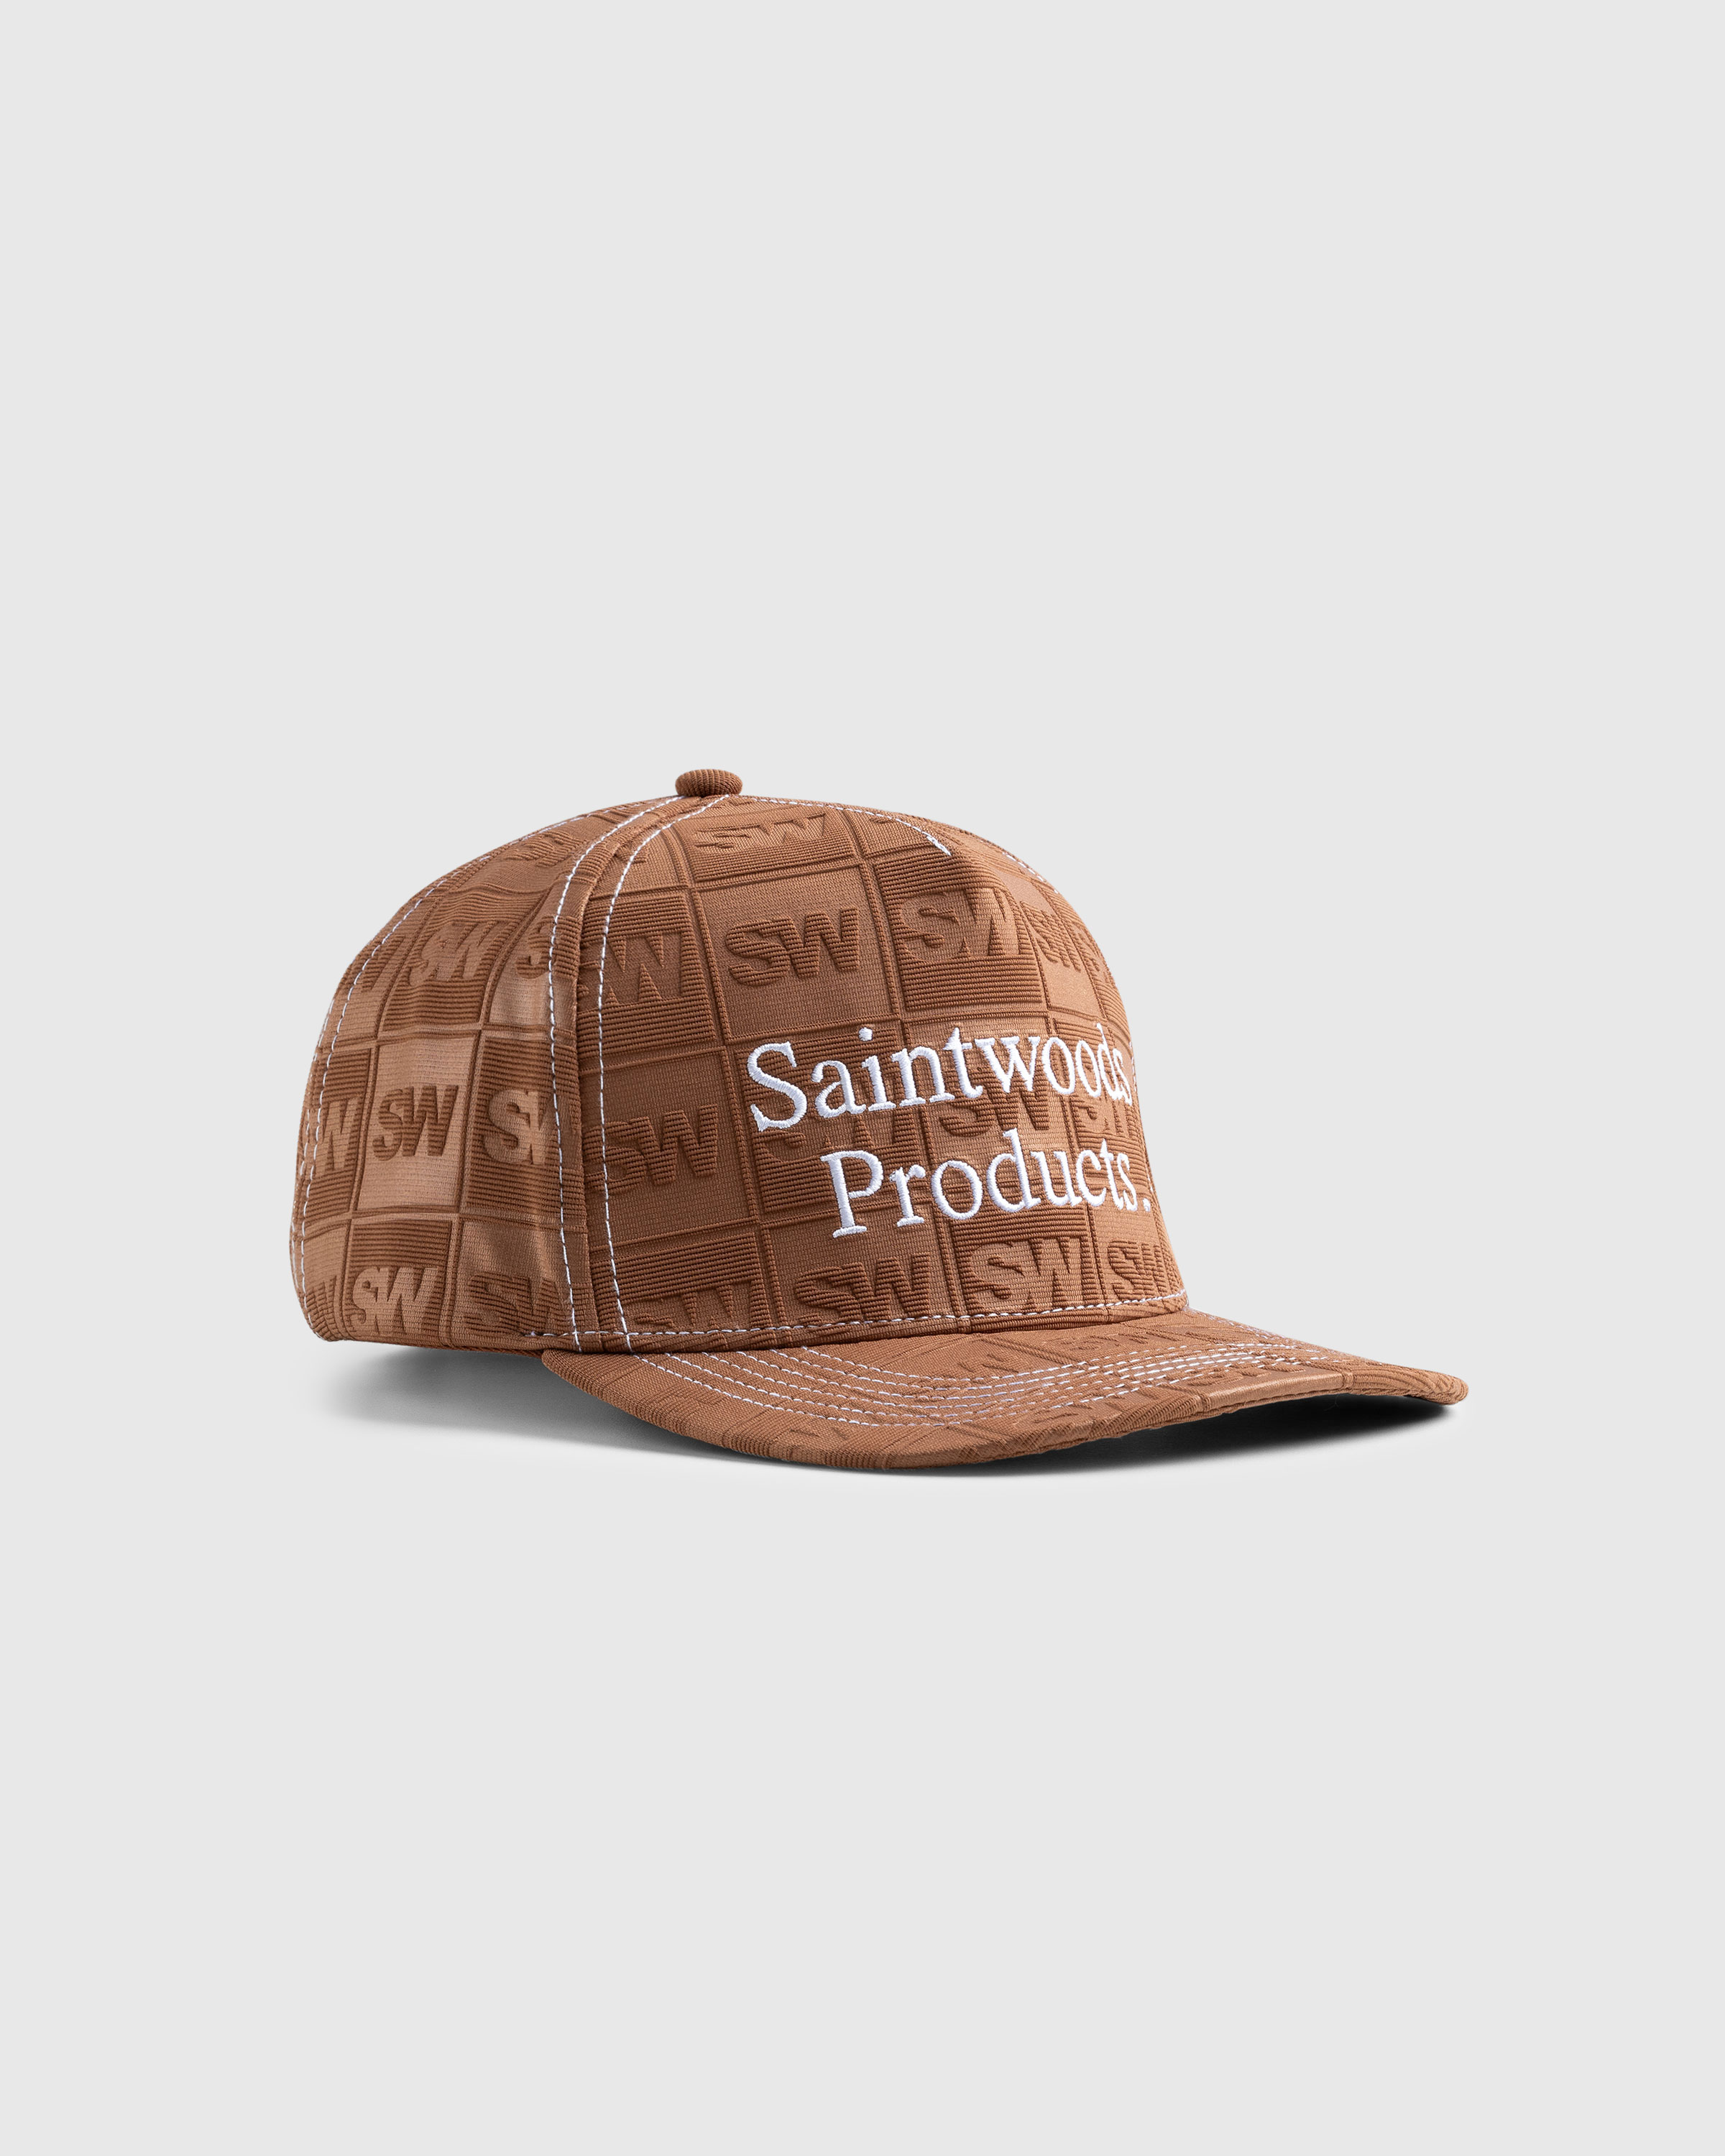 Saintwoods - SW Products Hat Brown - Accessories - Brown - Image 1